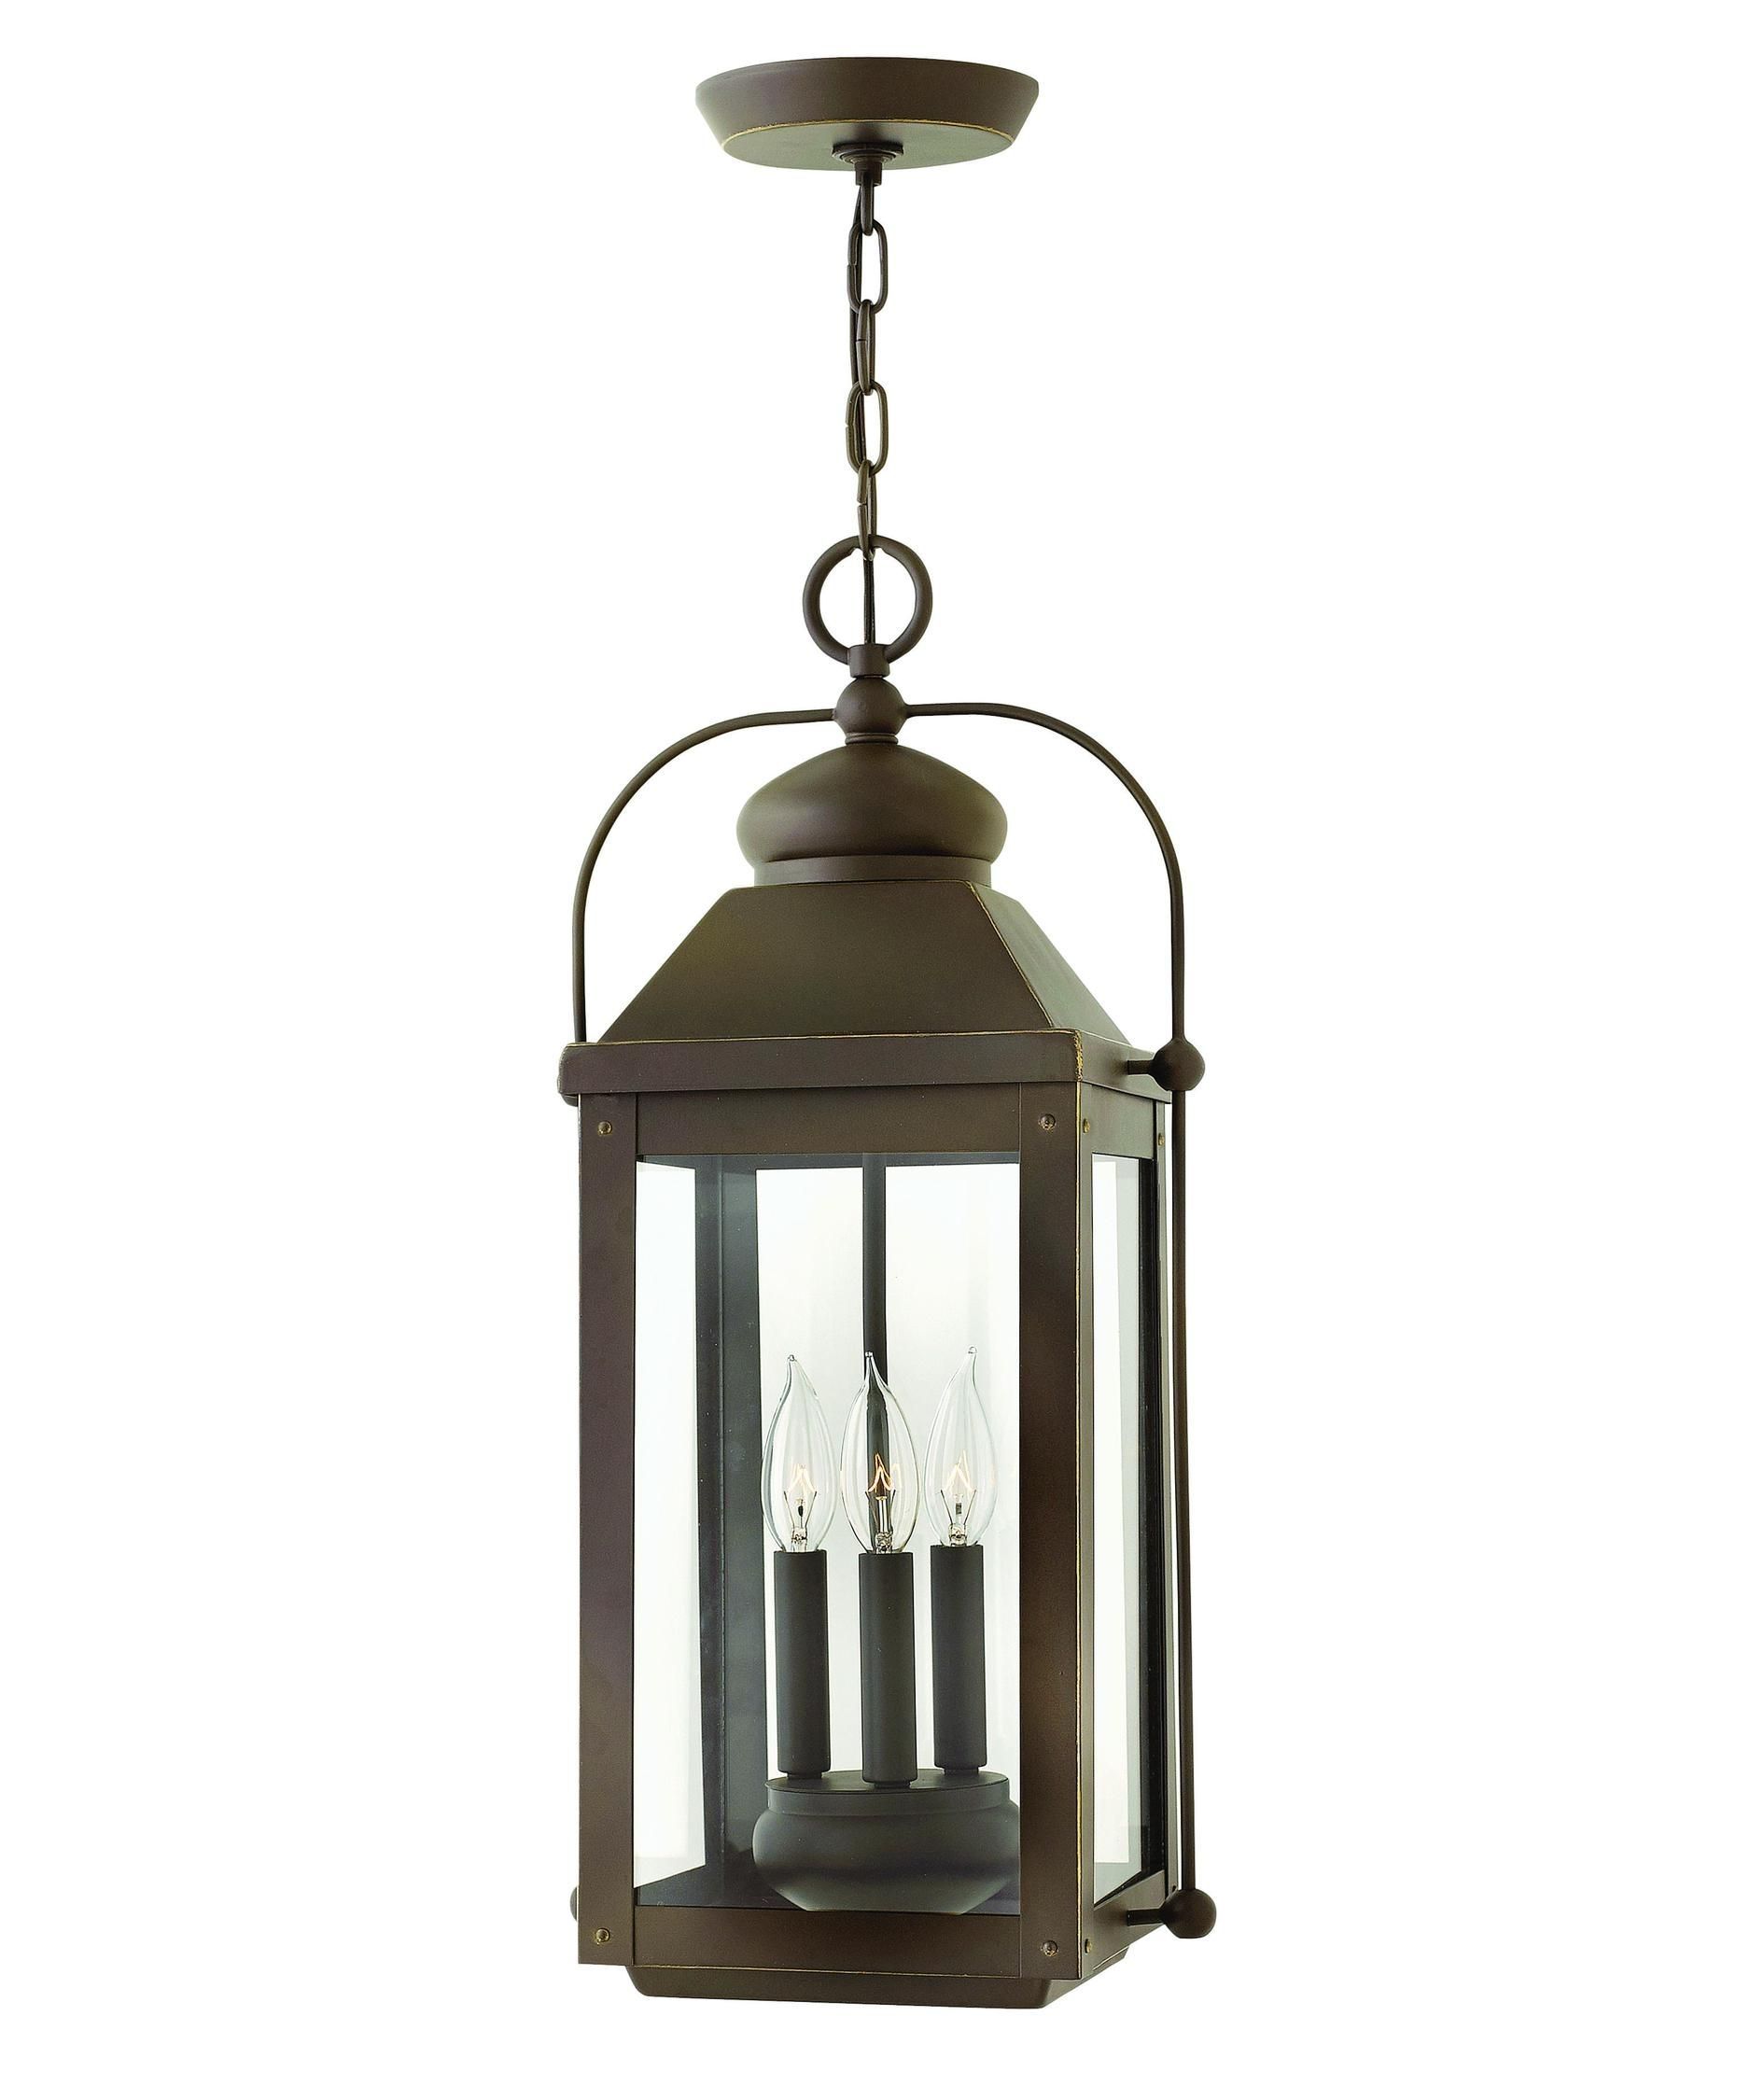 Hinkley Lighting Anchorage 11 Inch Wide 3 Light Outdoor Hanging Within Hinkley Outdoor Hanging Lights (View 9 of 15)